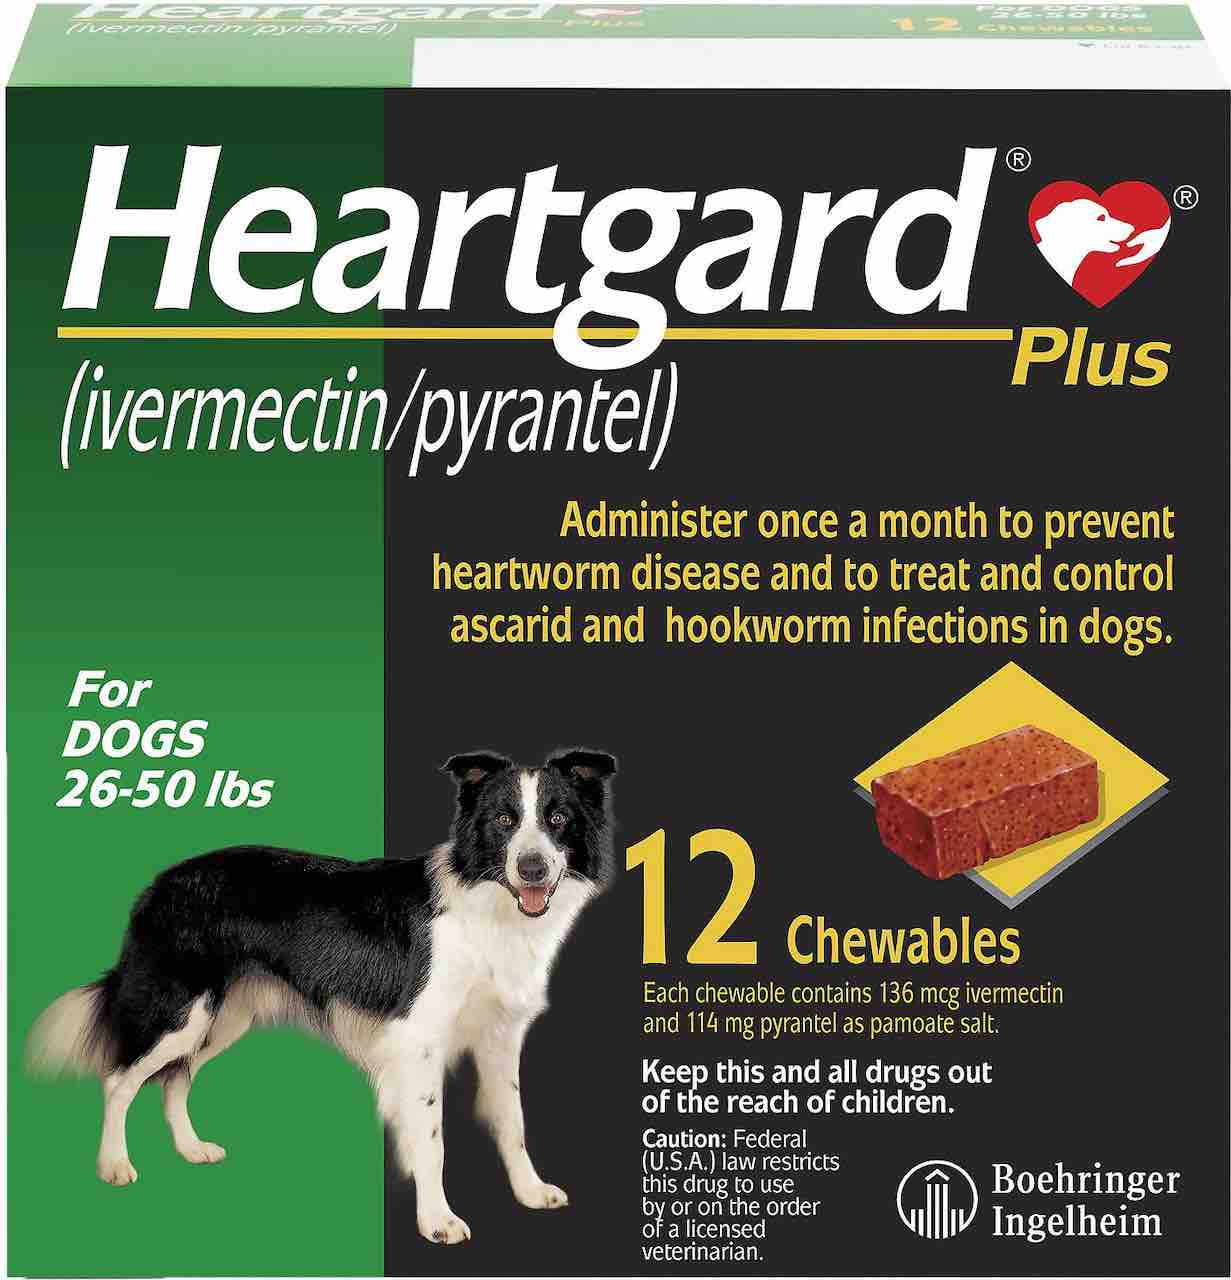 Heartgard Plus Chewables 12 doses for dogs 26-50 lbs (Green) 1